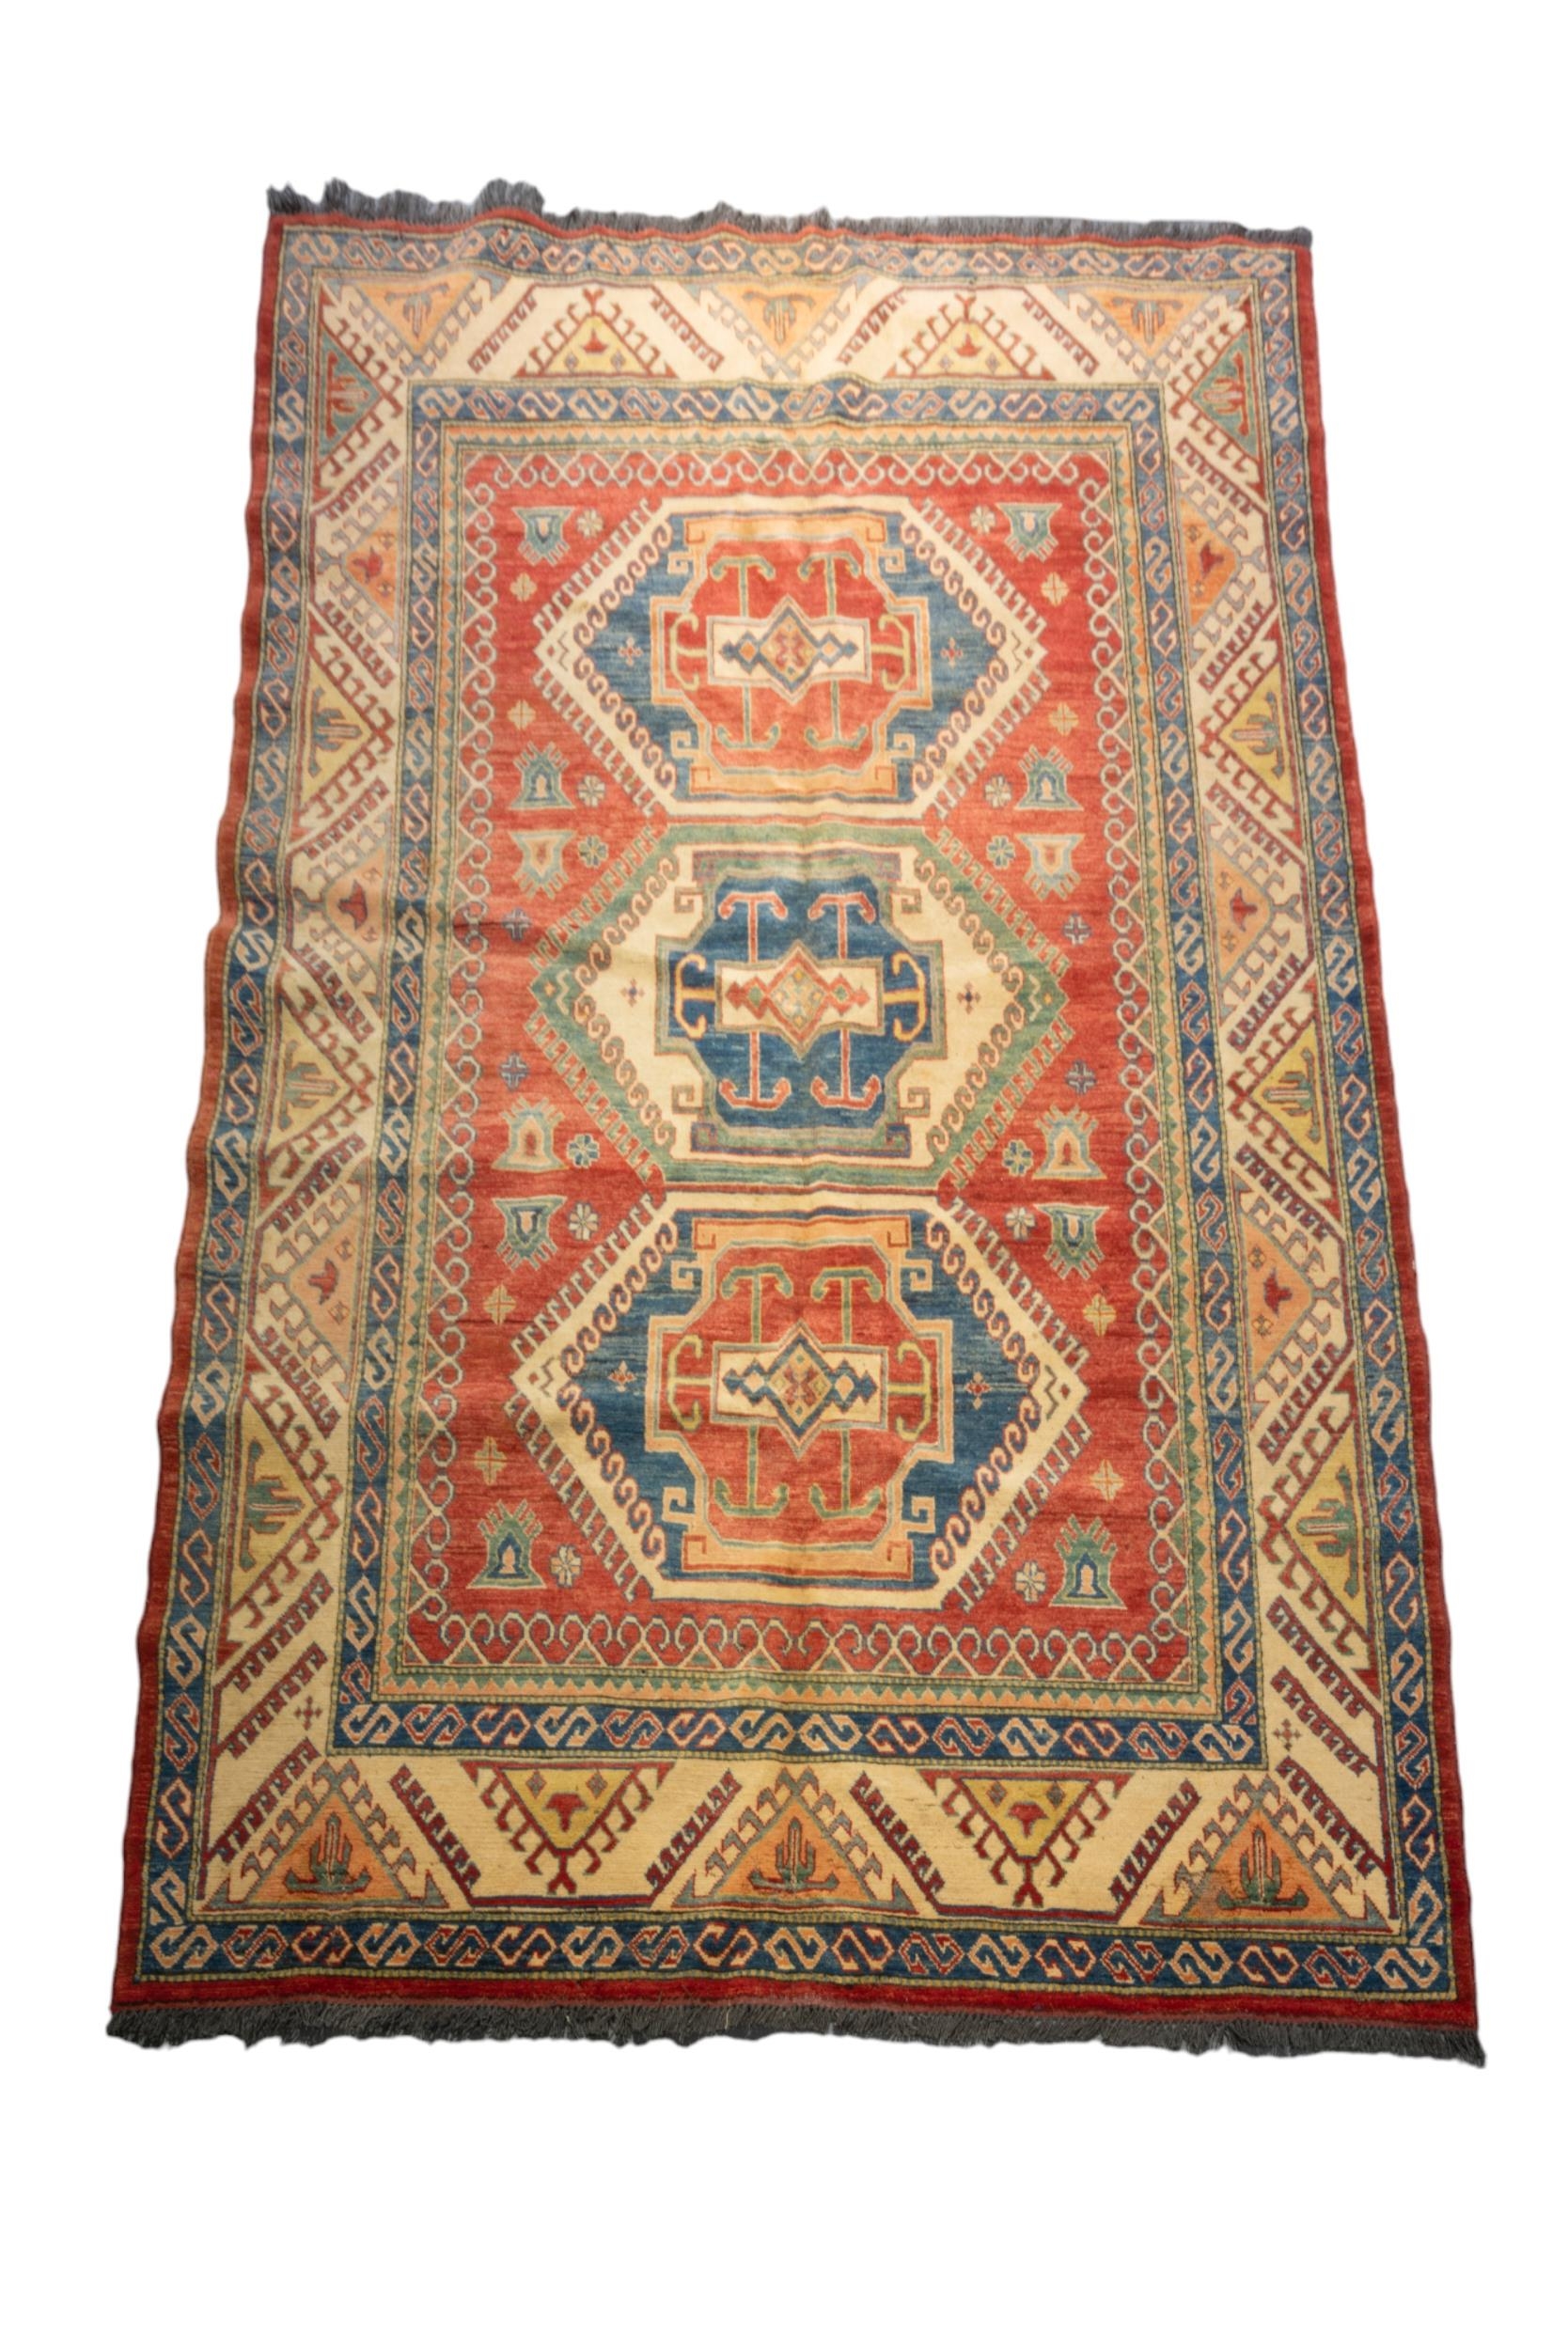 A HAND KNOTTED PERSIAN RUG, MID-LATE 20TH CENTURY, probably Kazhak, small area of damage 332 x 200 - Image 4 of 6